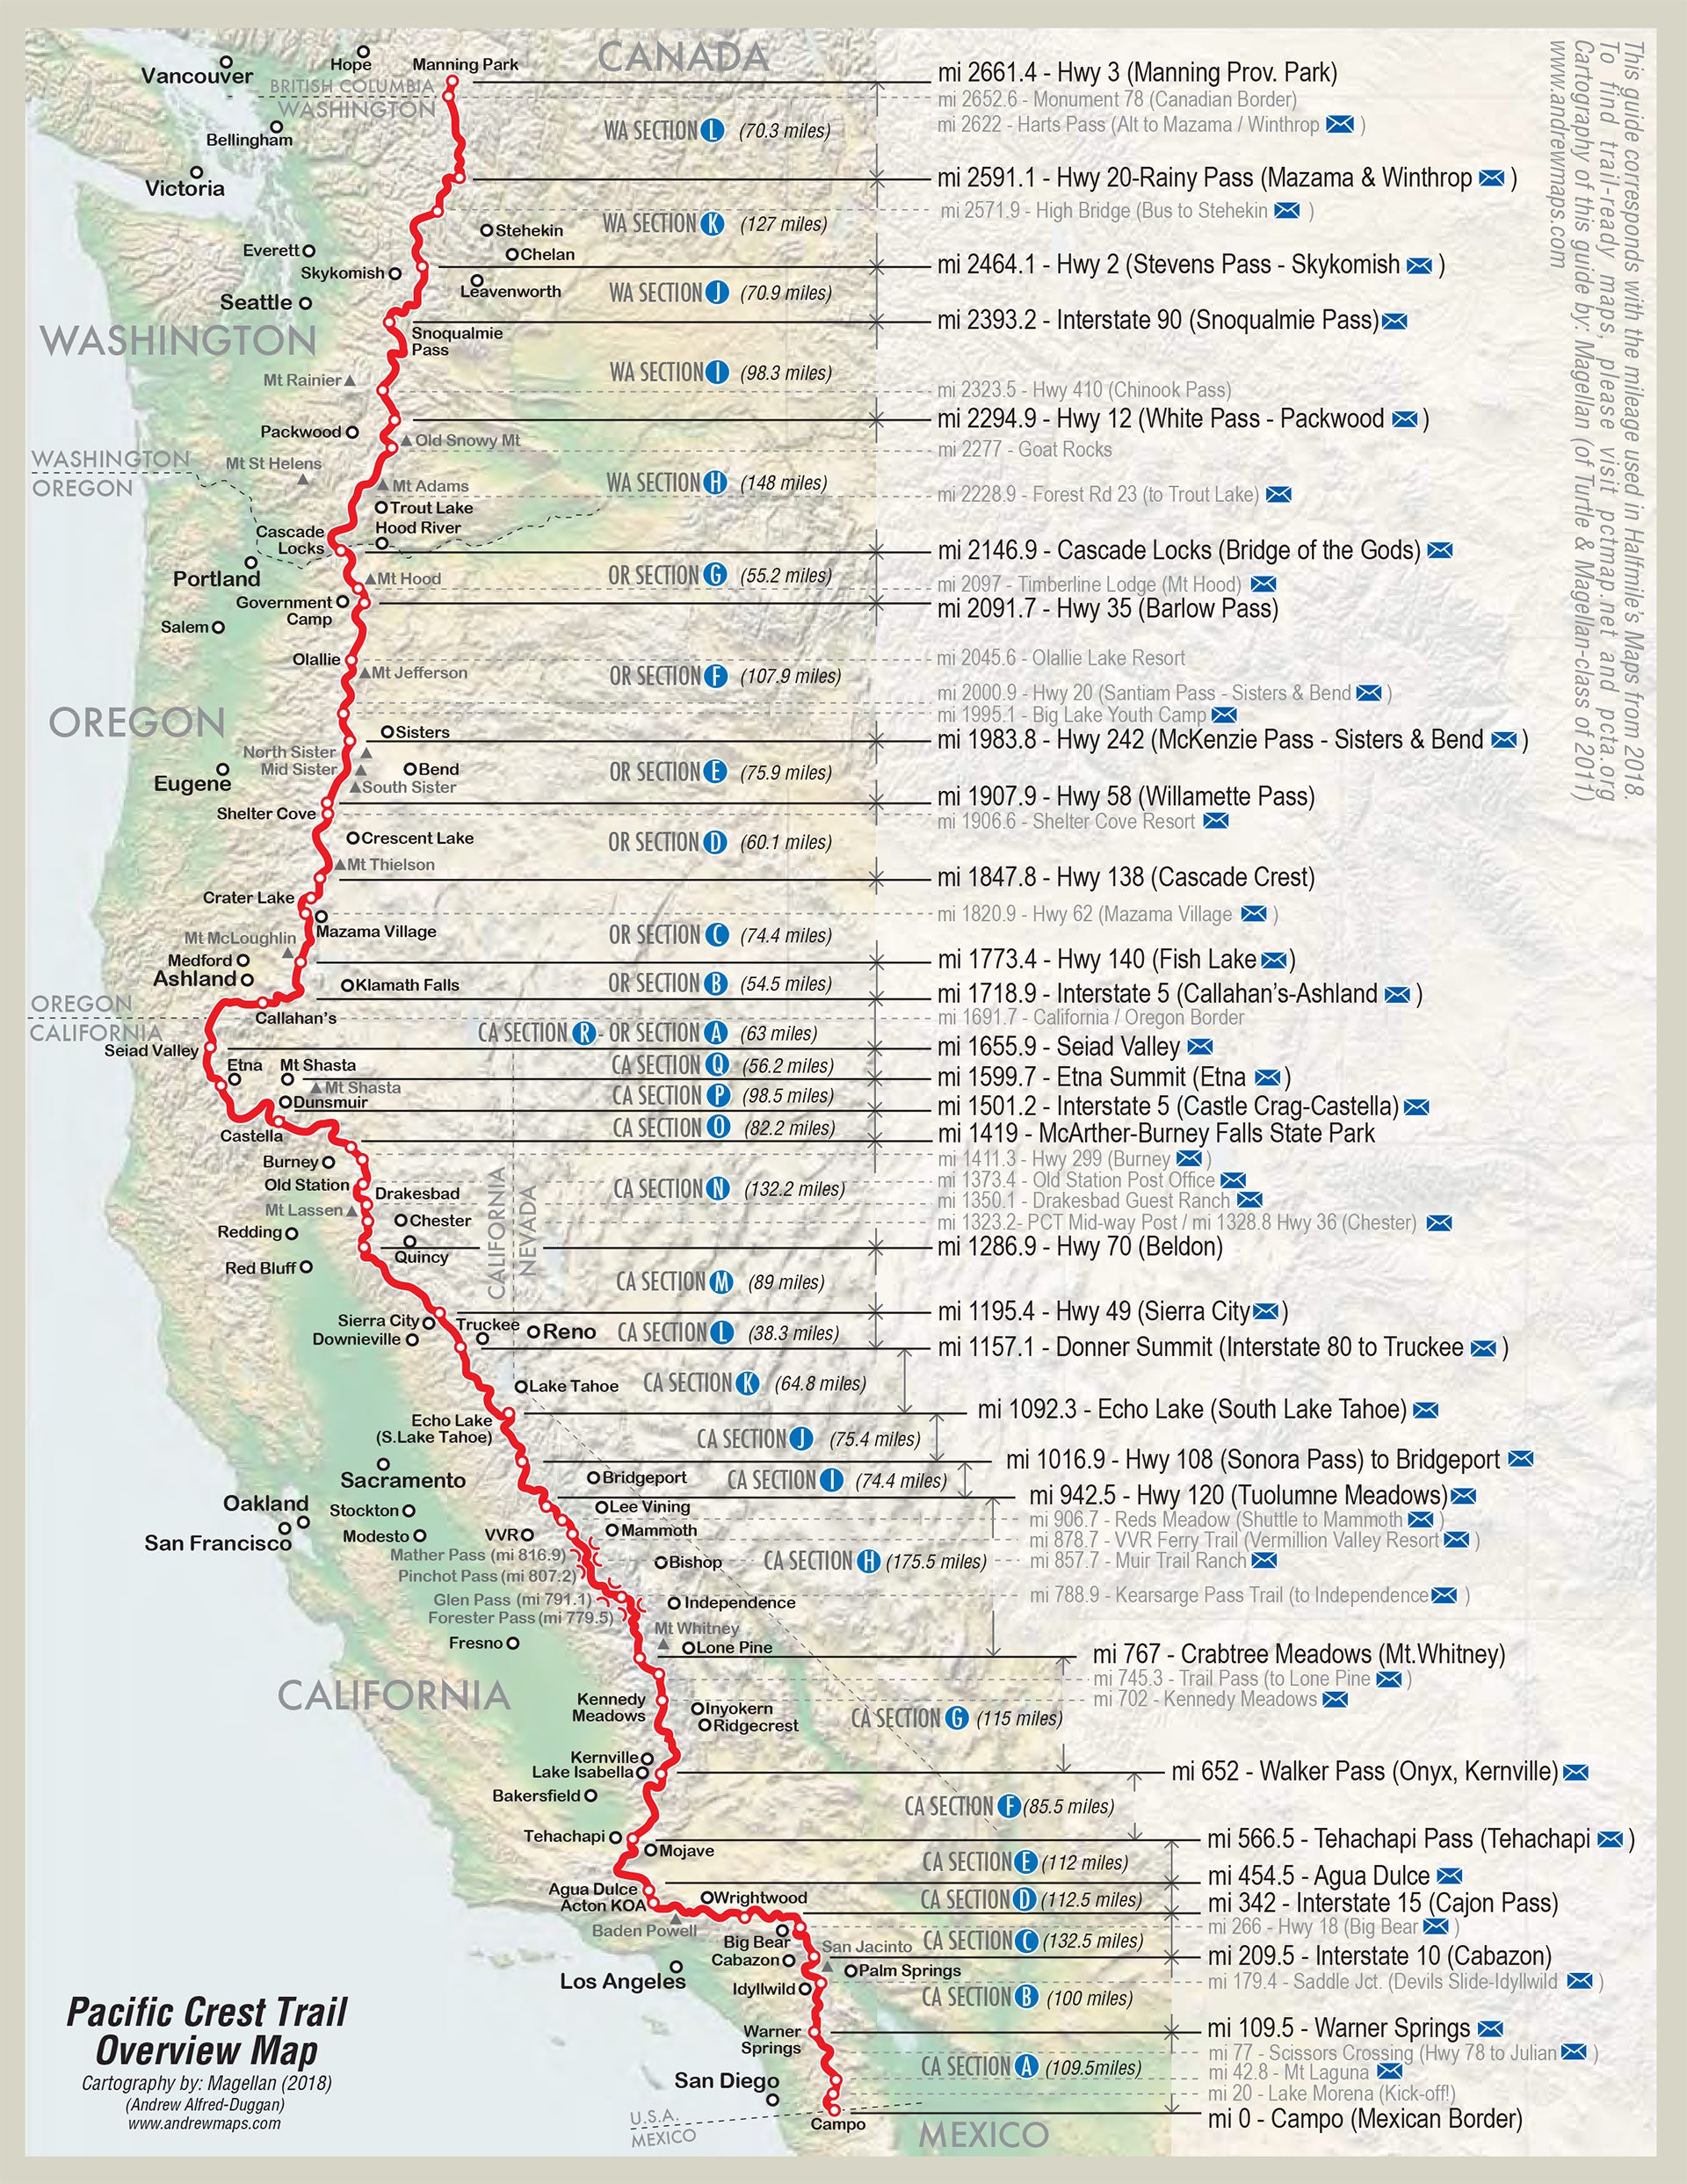 PCT overview map